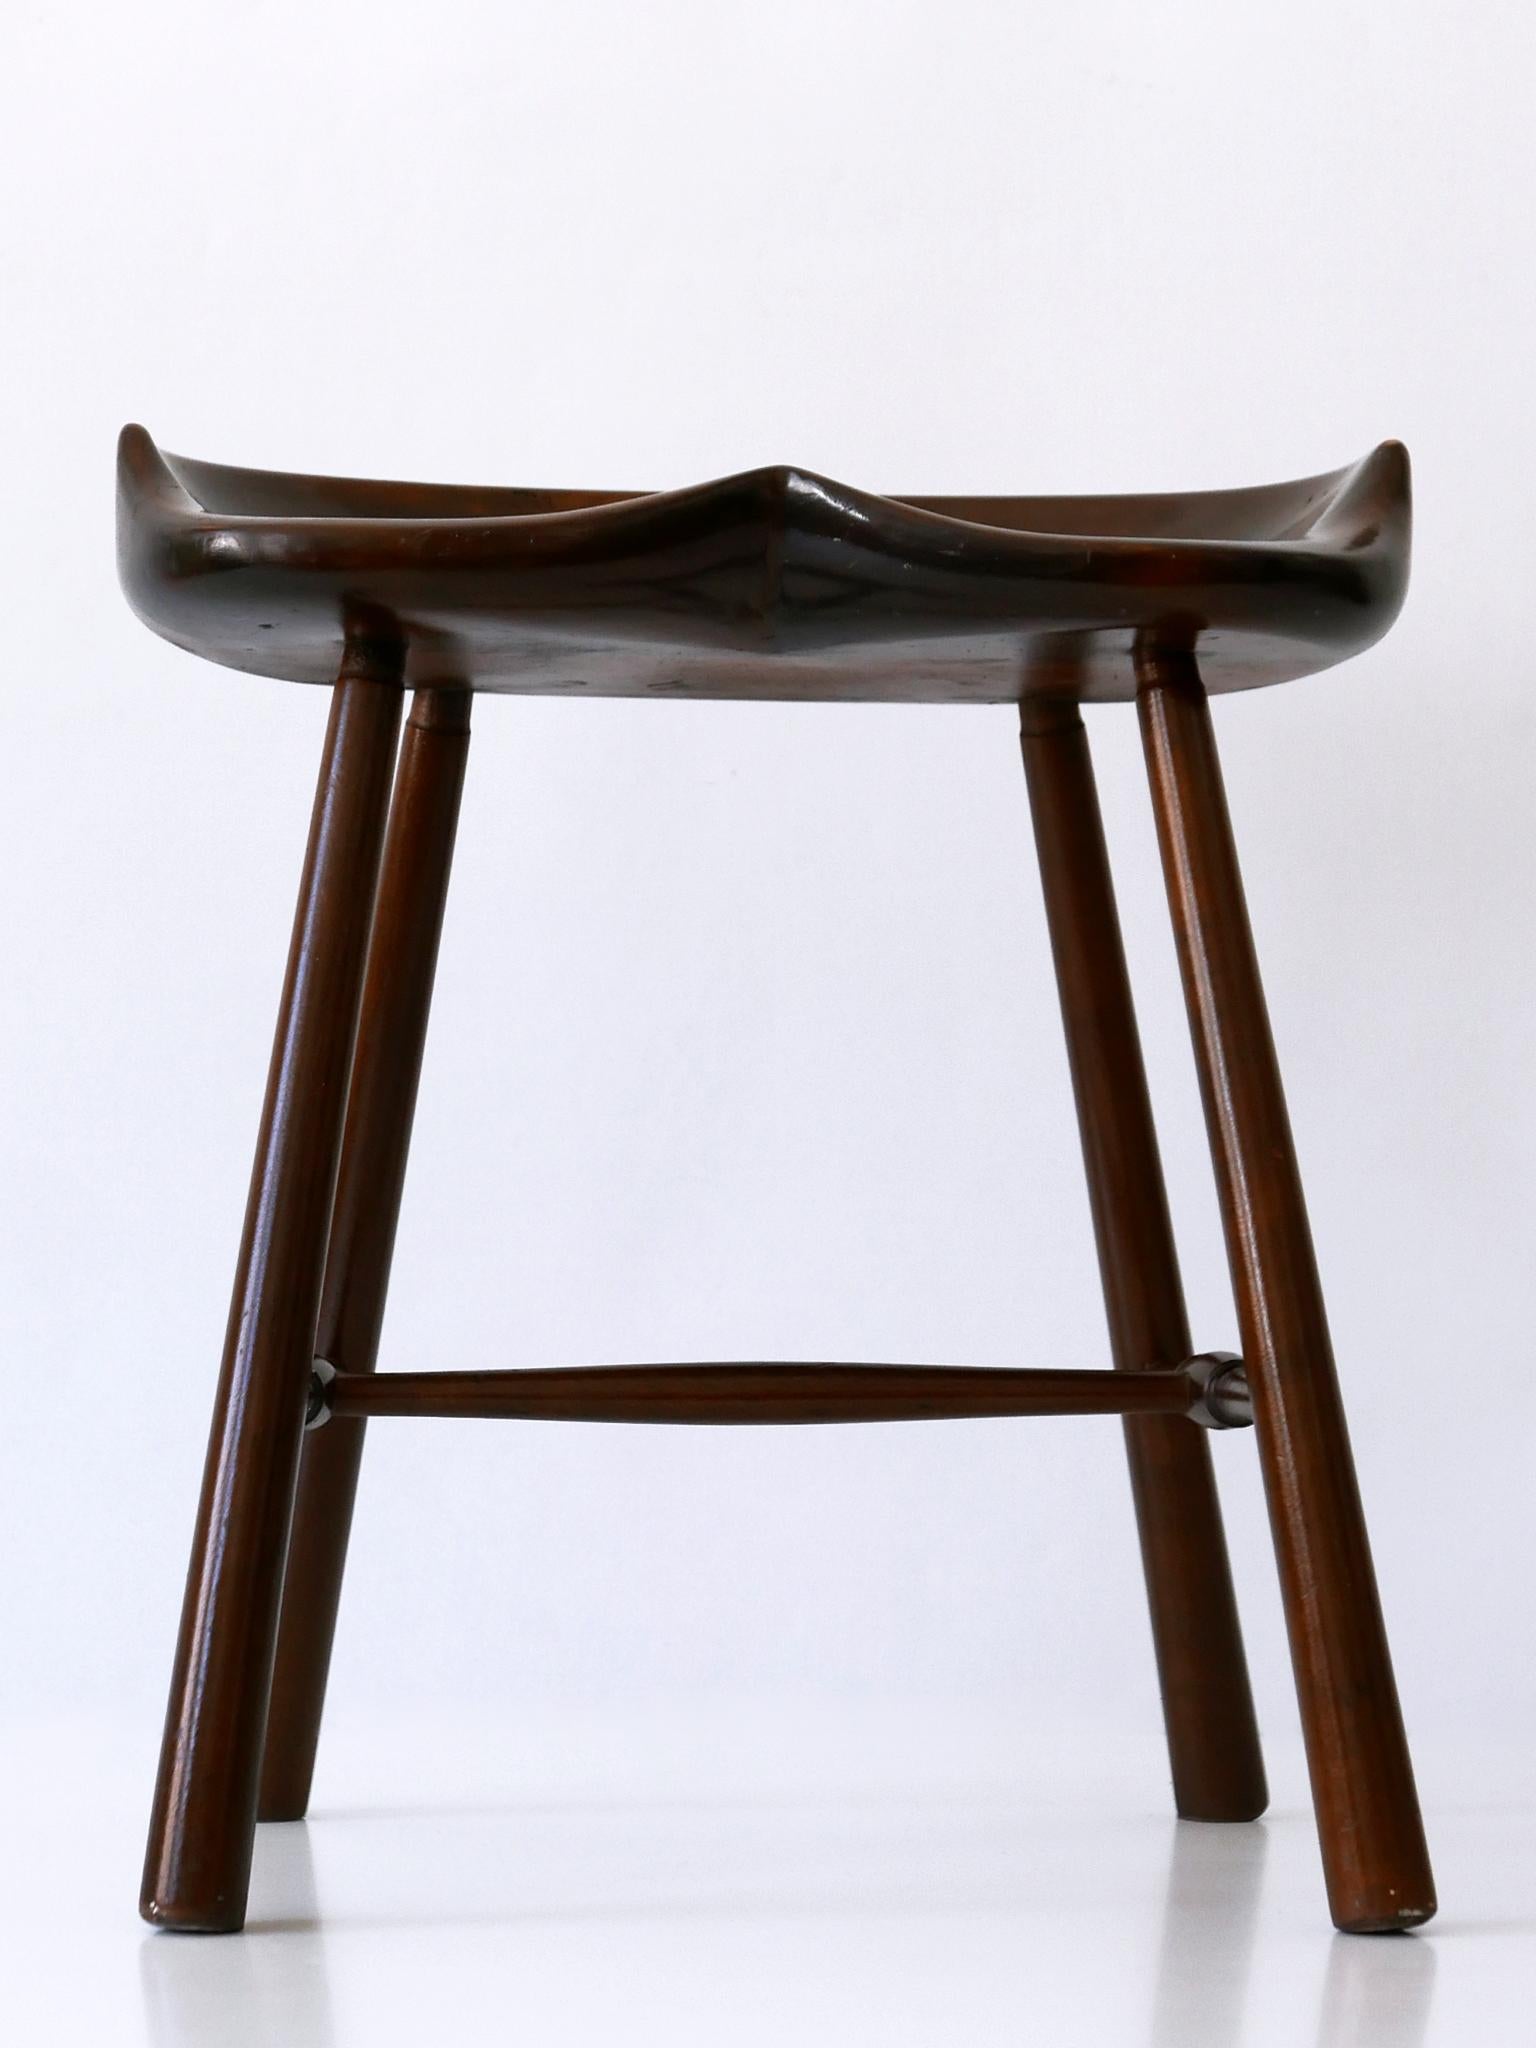 Carved Sculptural Mid-Century Modern Solid Wood Stool Germany 1950s For Sale